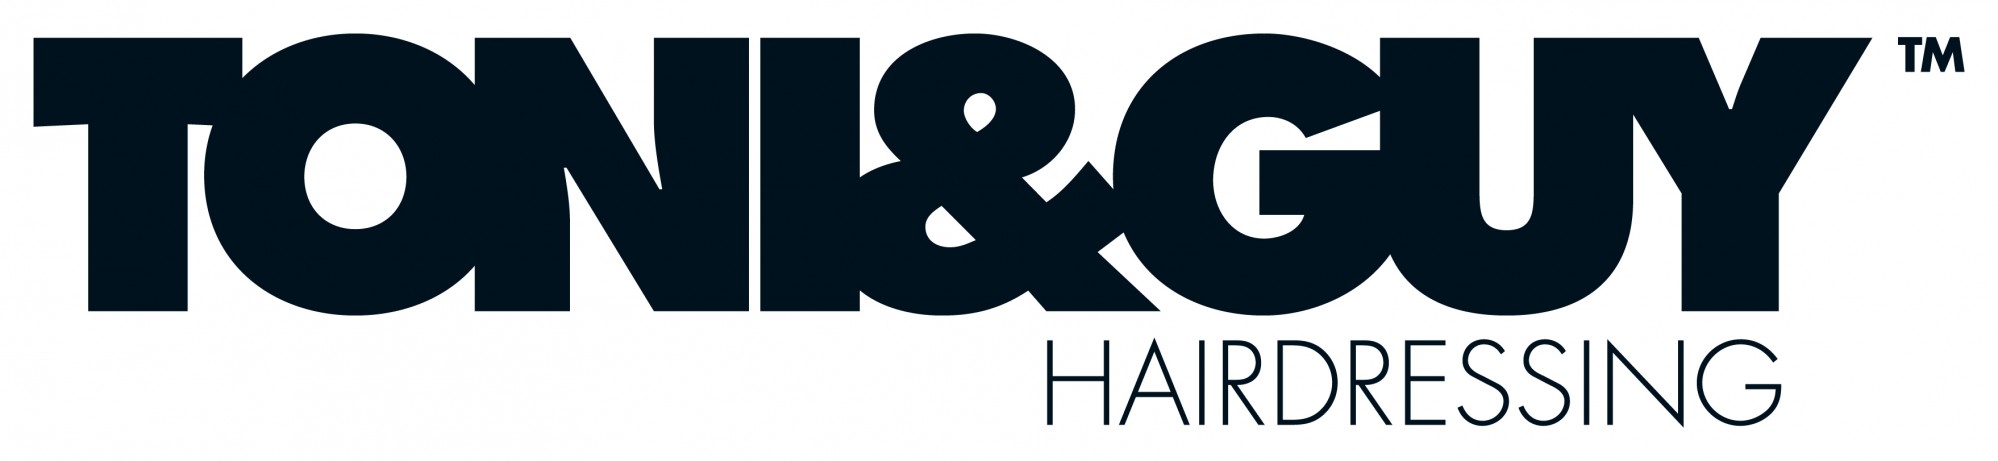 The Hairdressing Council - What's New